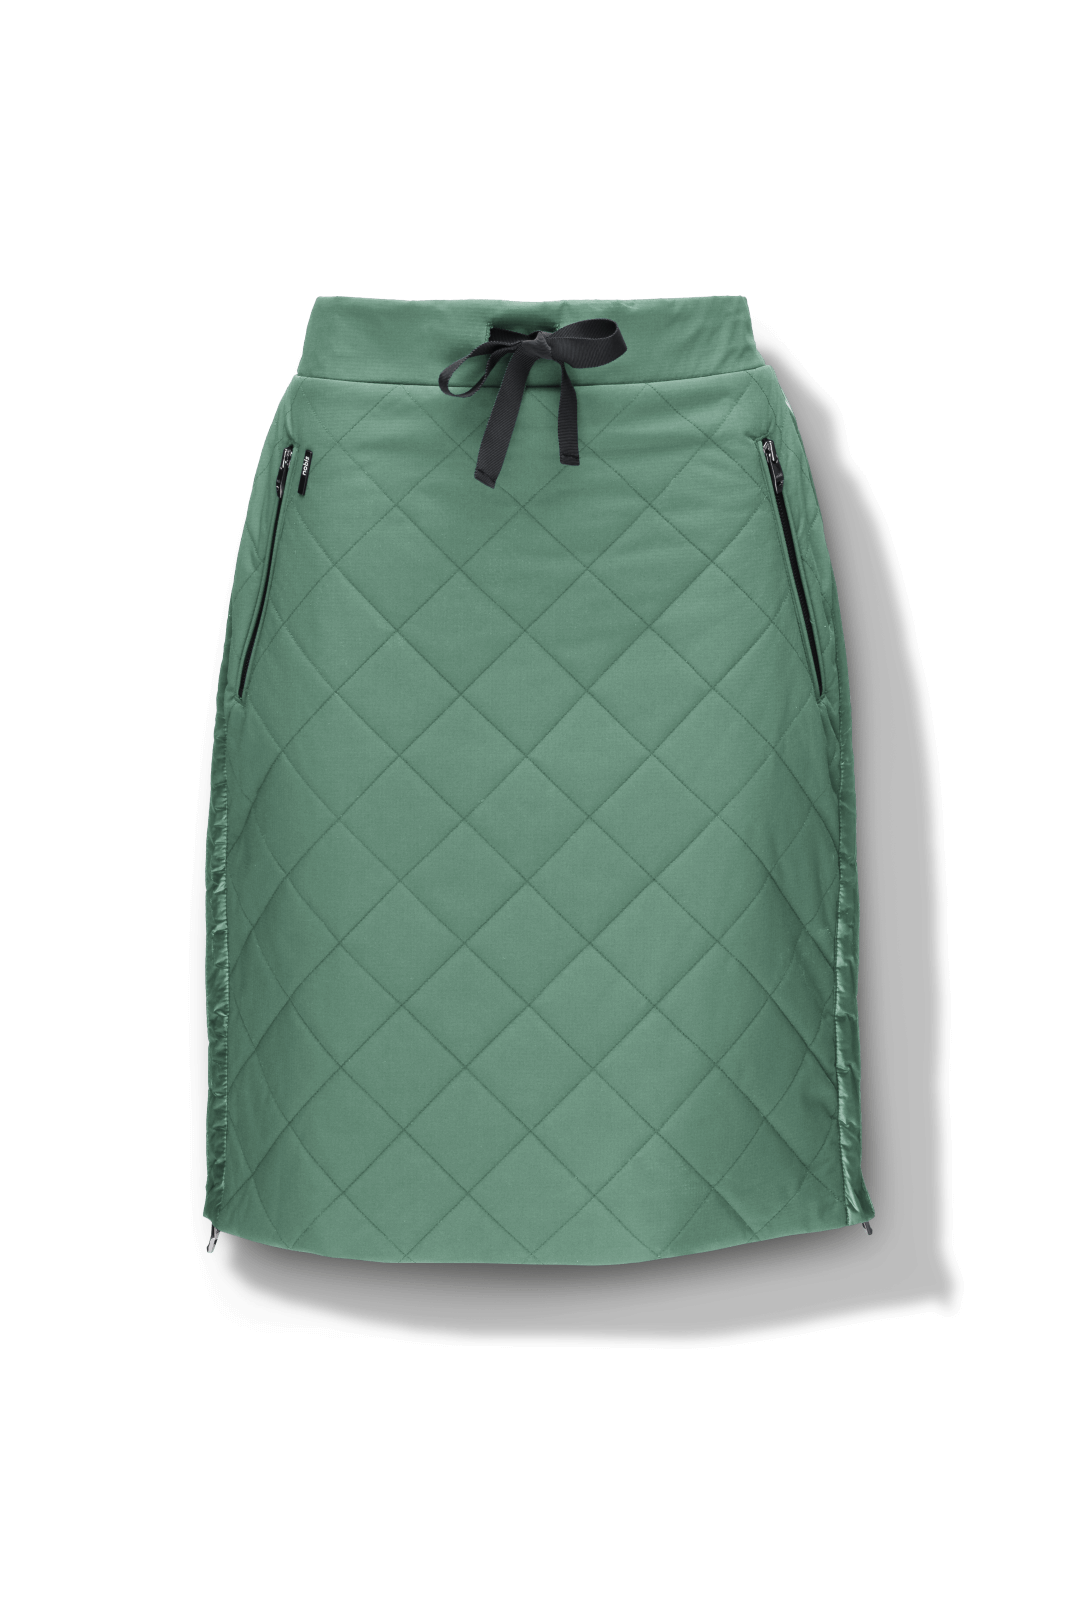 Phora Women's Tailored Skirt in knee length, premium stretch ripstop and contrast cire technical nylon taffeta fabrication, premium 4-way stretch, water resistant Primaloft Gold Insulation Active+, elasticated waistband with grosgrain ribbon drawstrings, two zipper pockets at waist, and zipper closure gusset at side seams, in Comfrey